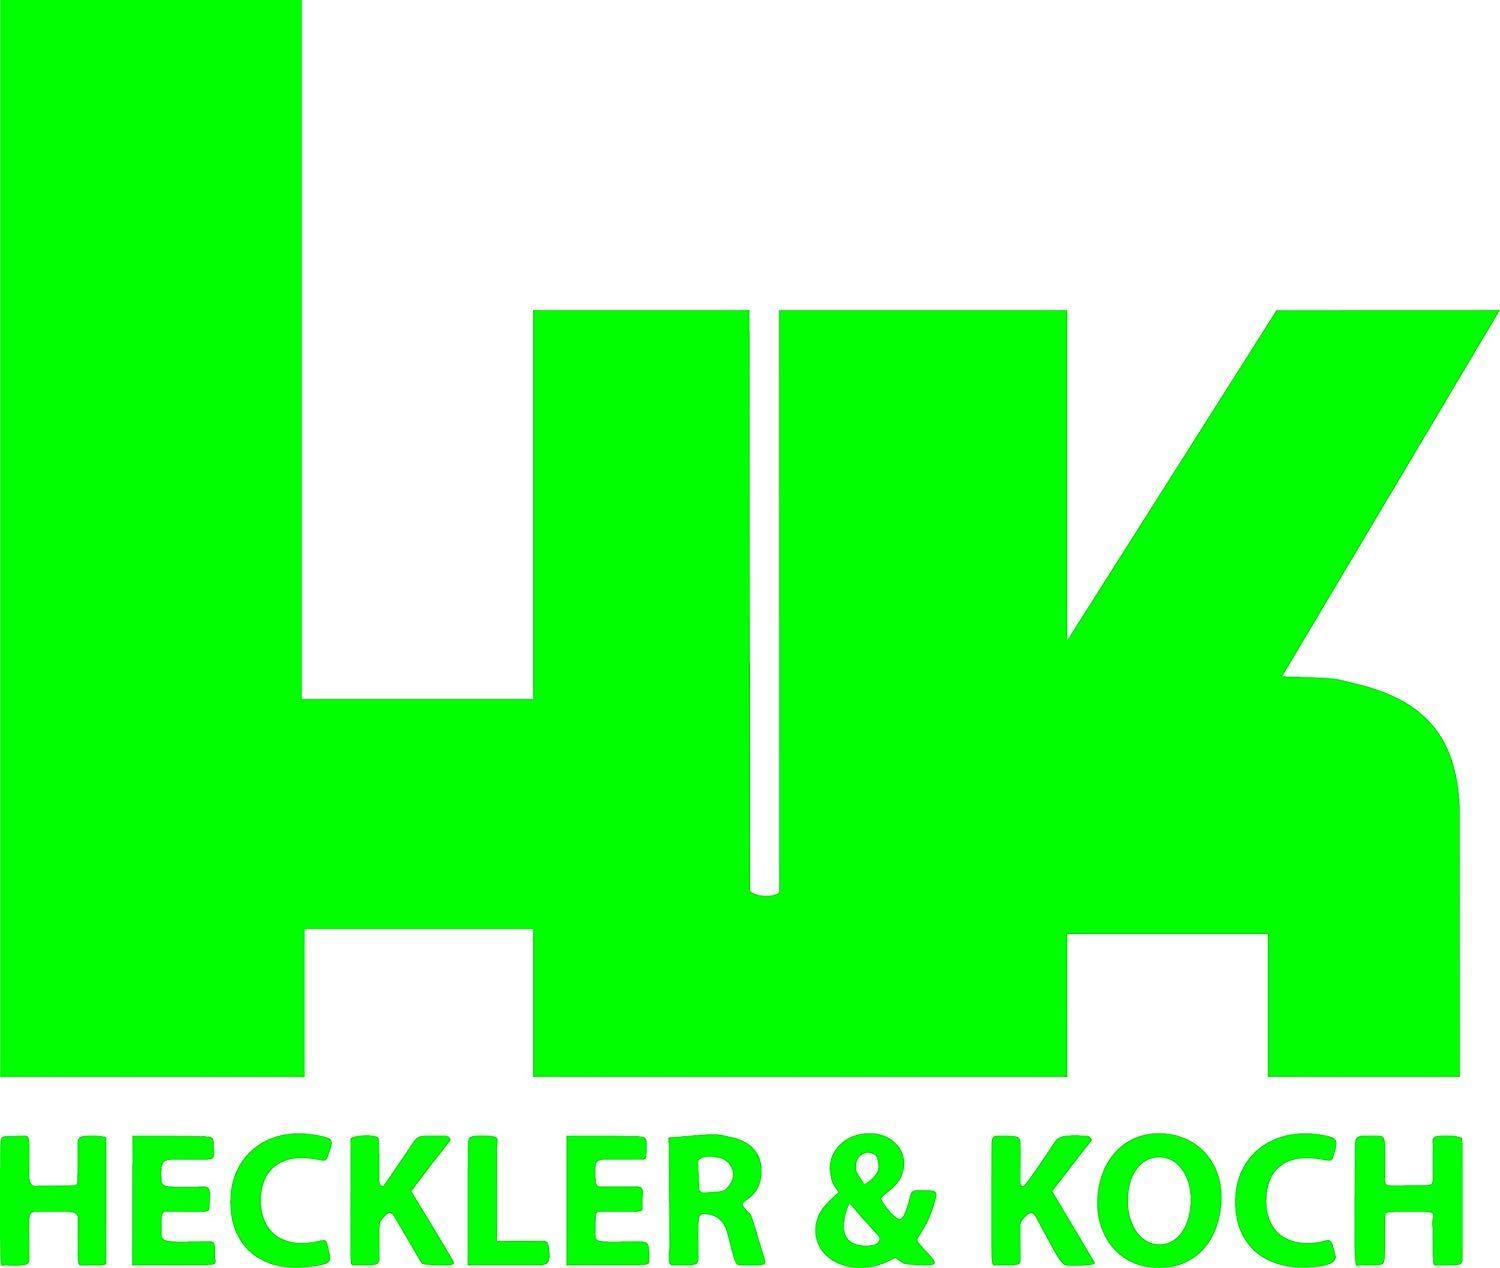 Heckler and Koch Logo - Amazon.com: Heckler and Koch logo letters (Lime Green): Automotive